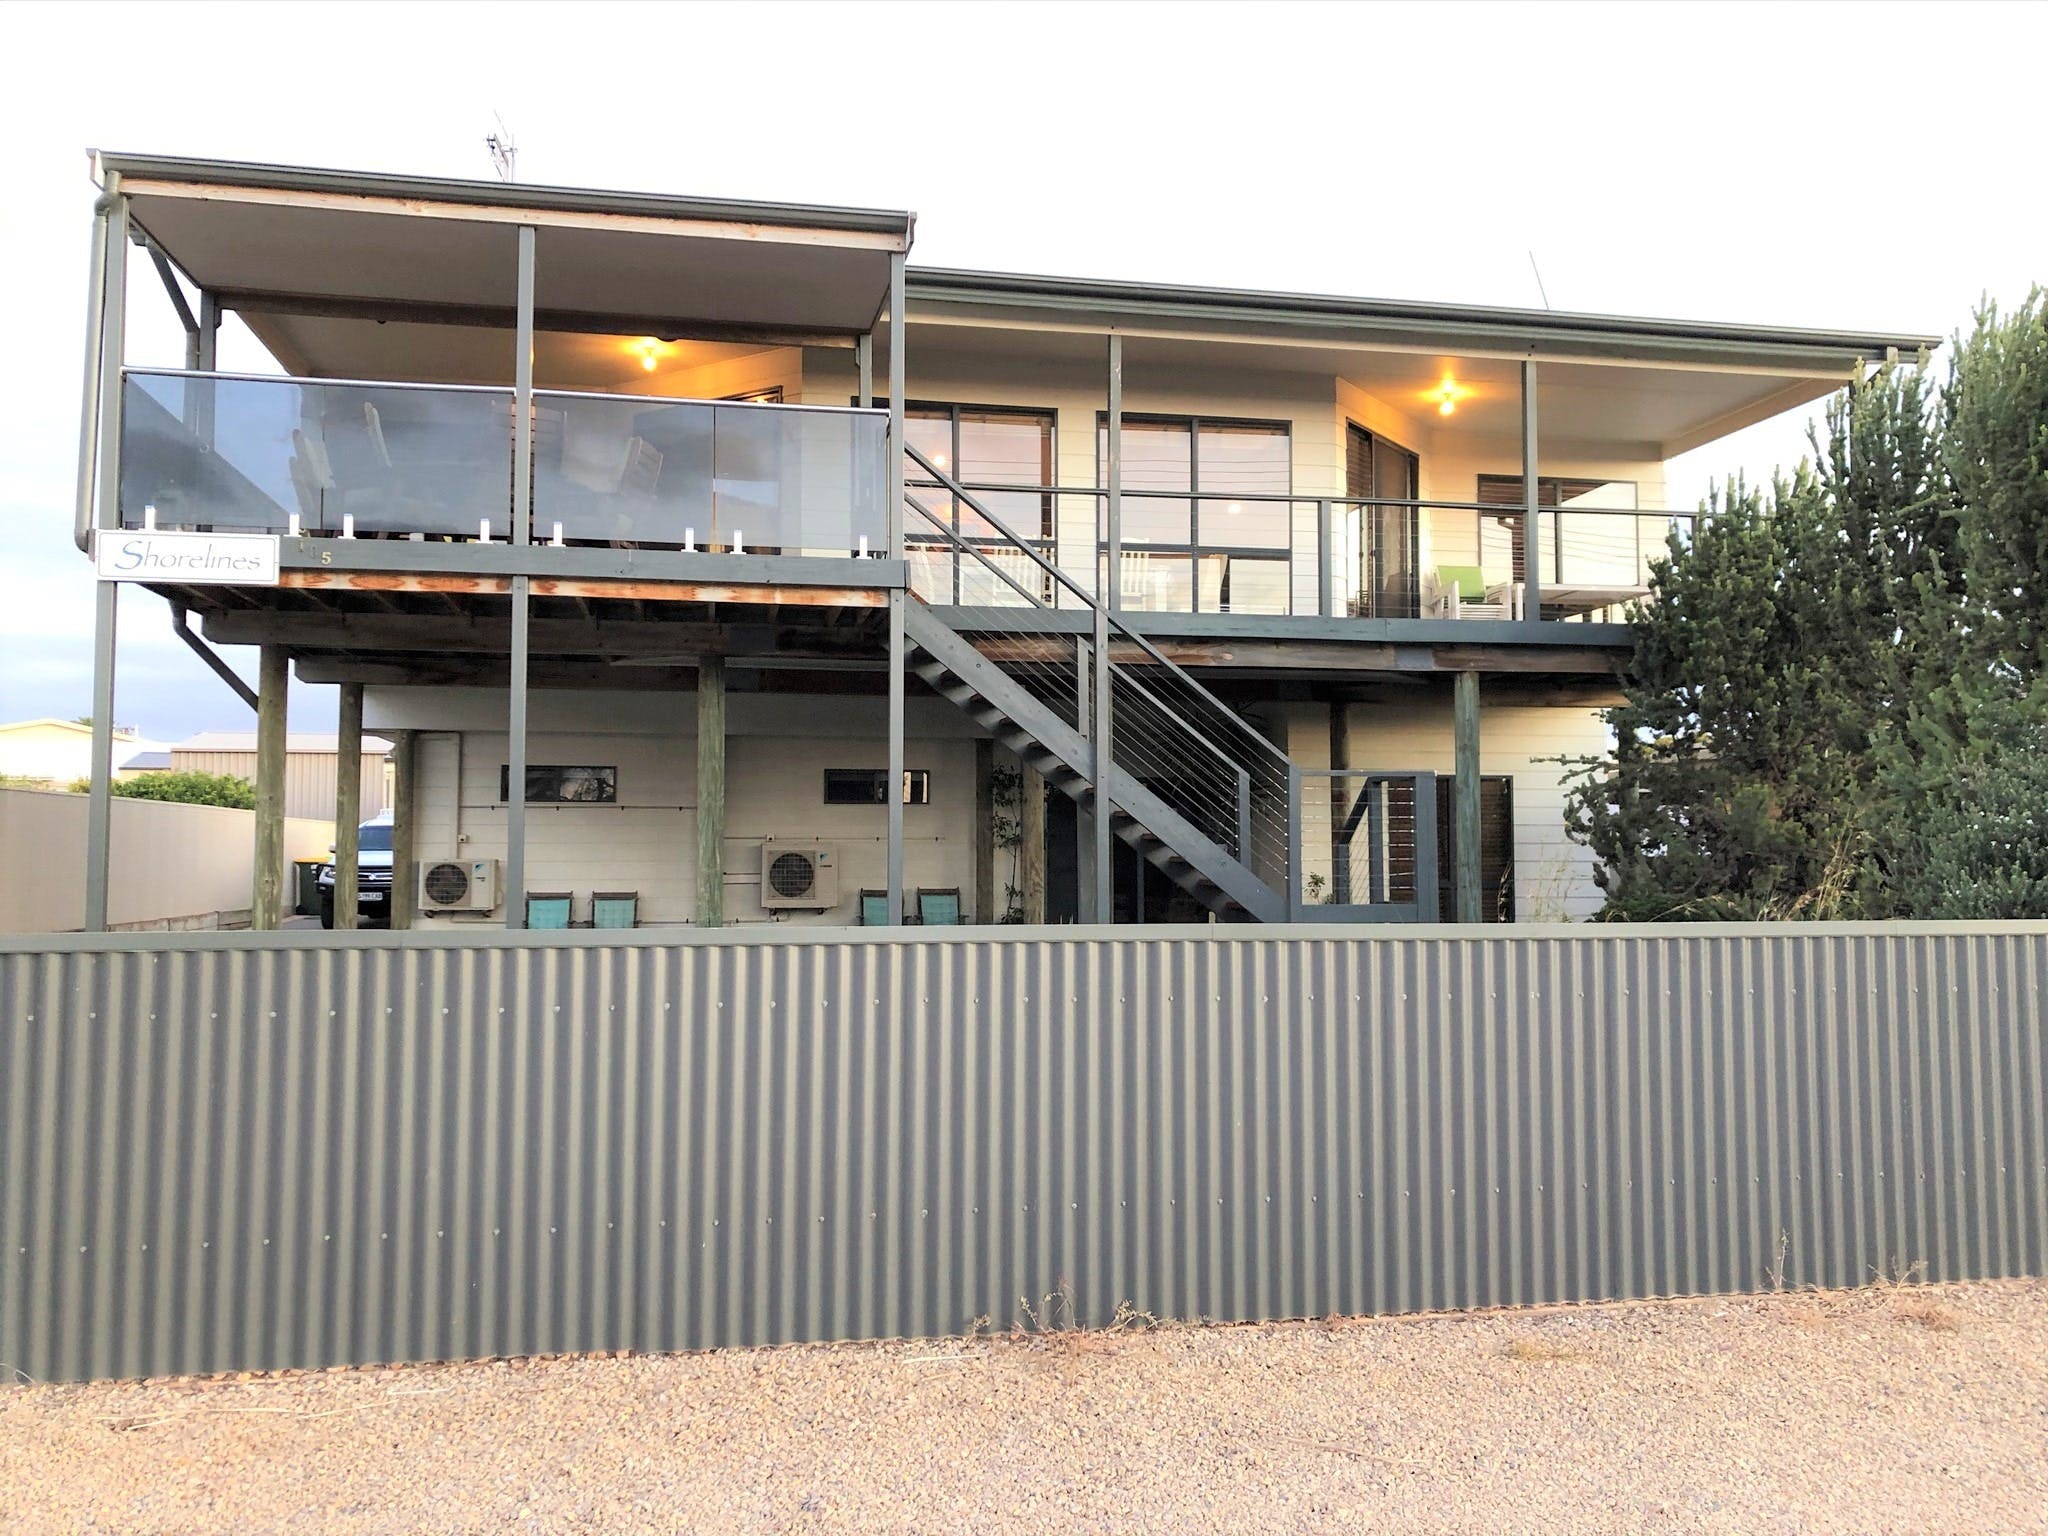 Shorelines - Coogee Beach Accommodation